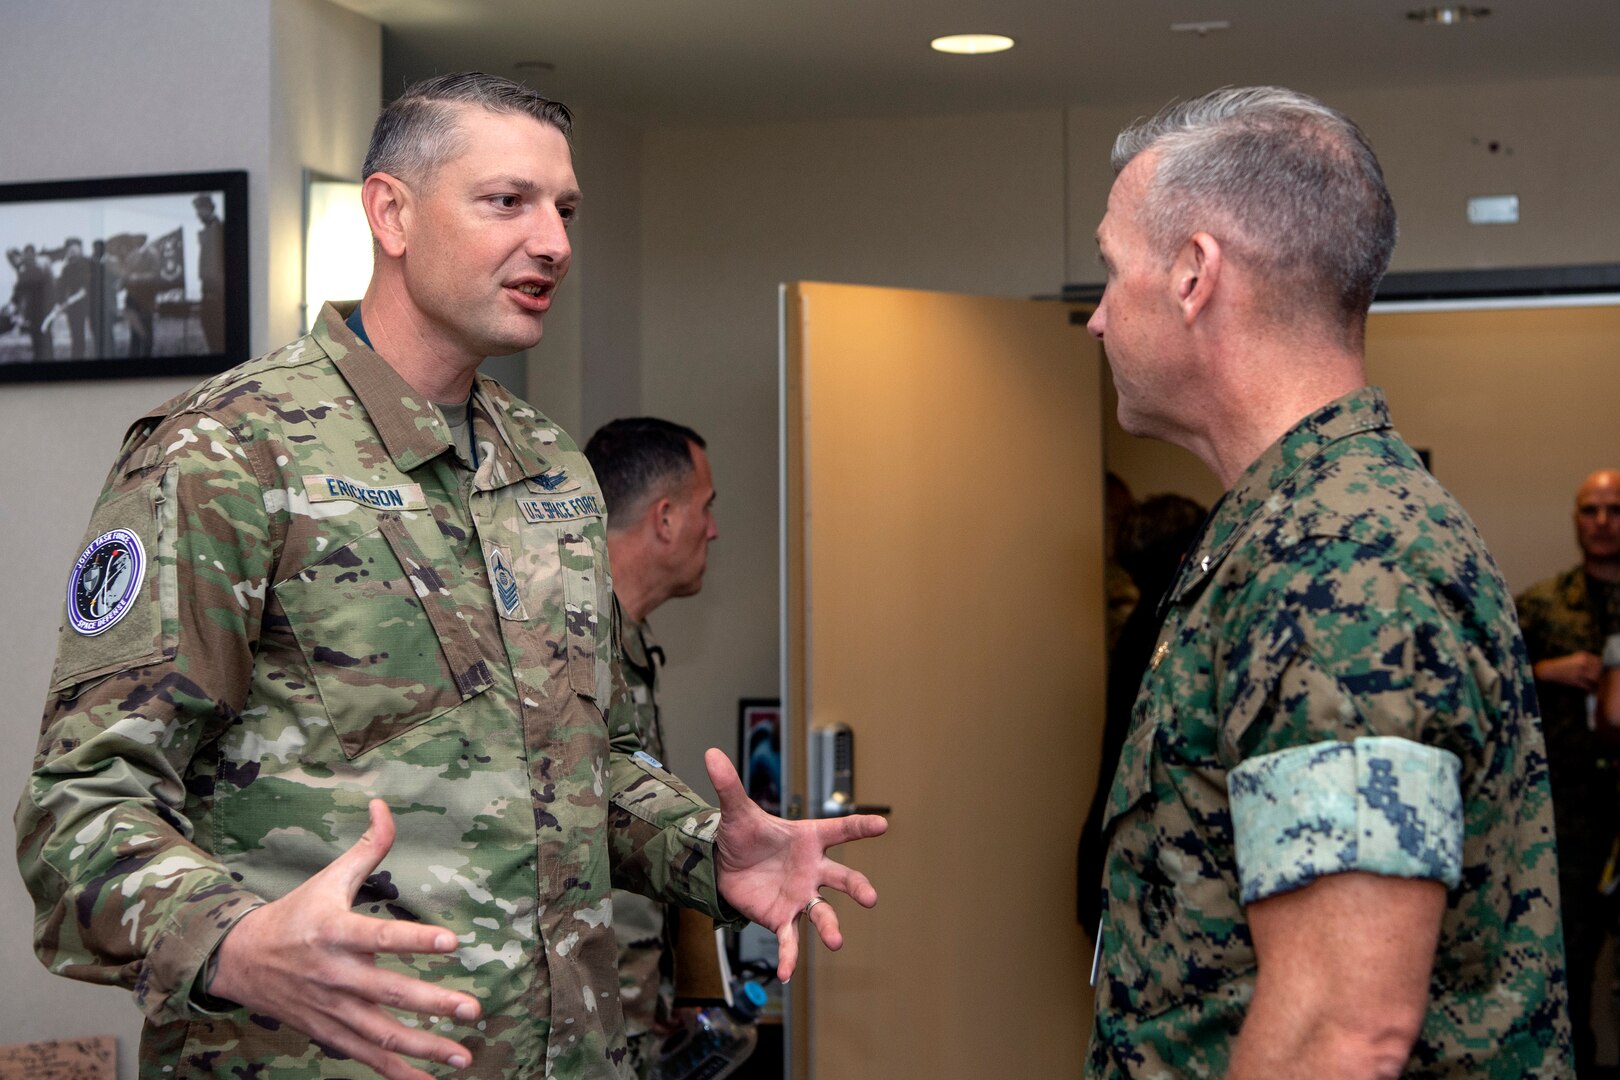 Two military men speaking to eachother